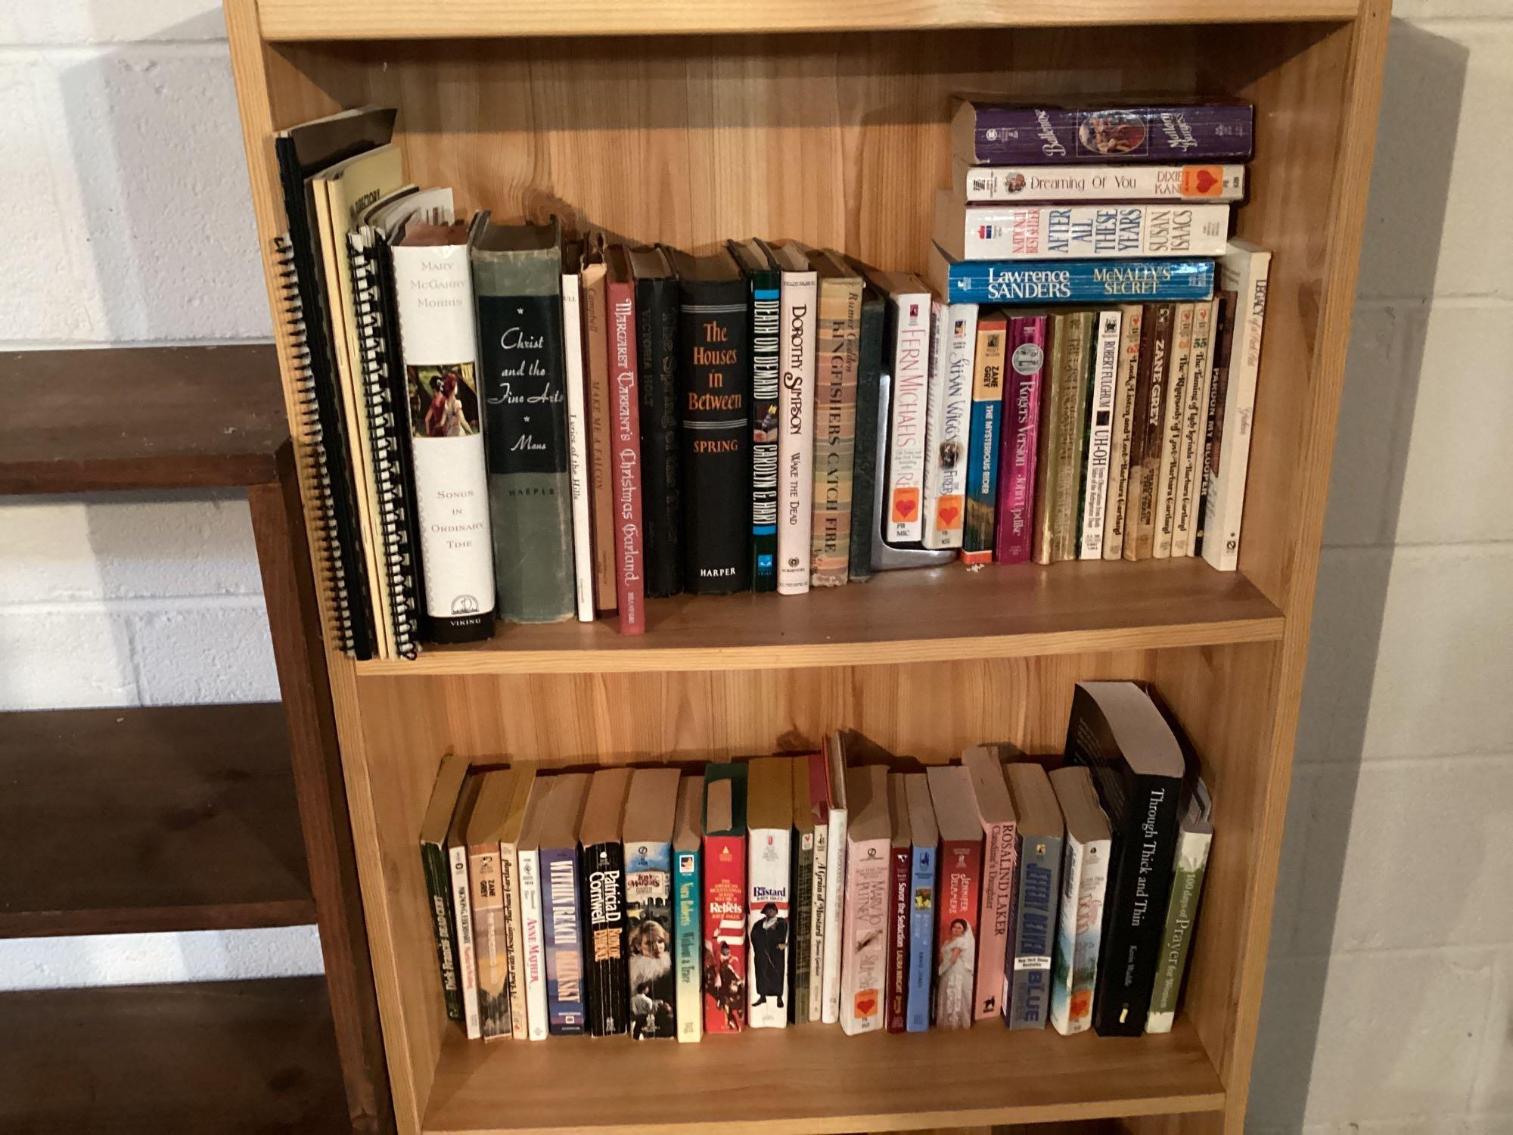 Image for Shelf Units with Books